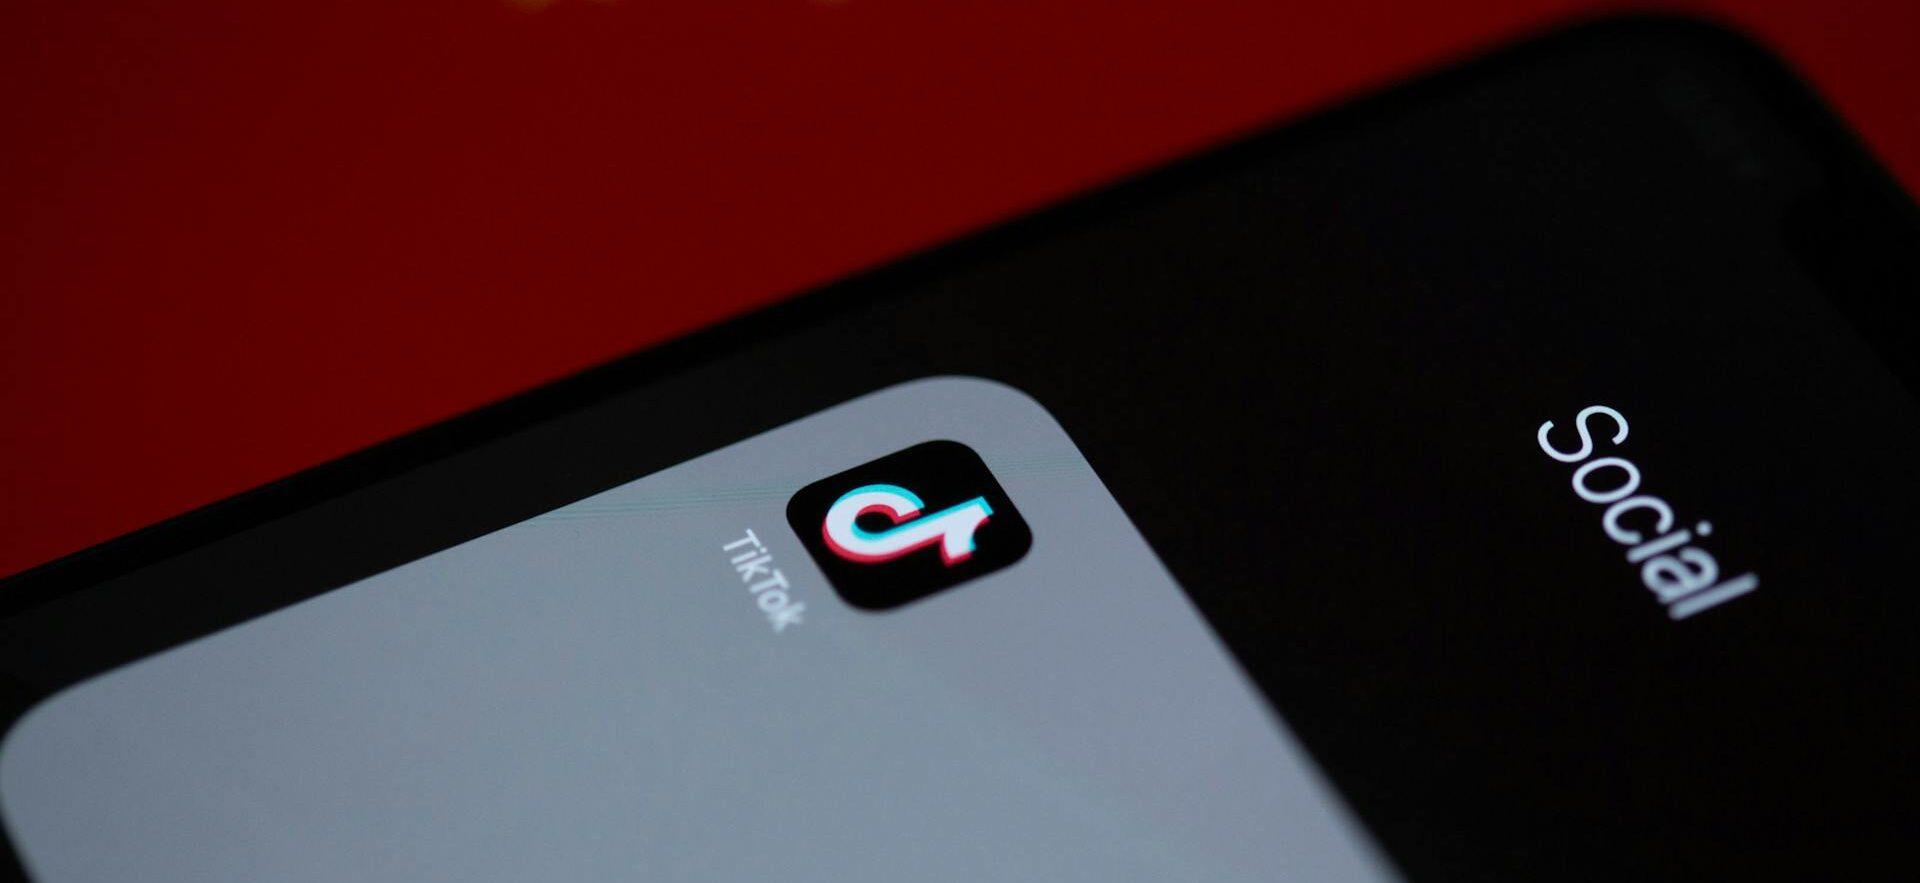 TikTok CEO Issues Strong Statement In Response To Platform’s Ban Bill